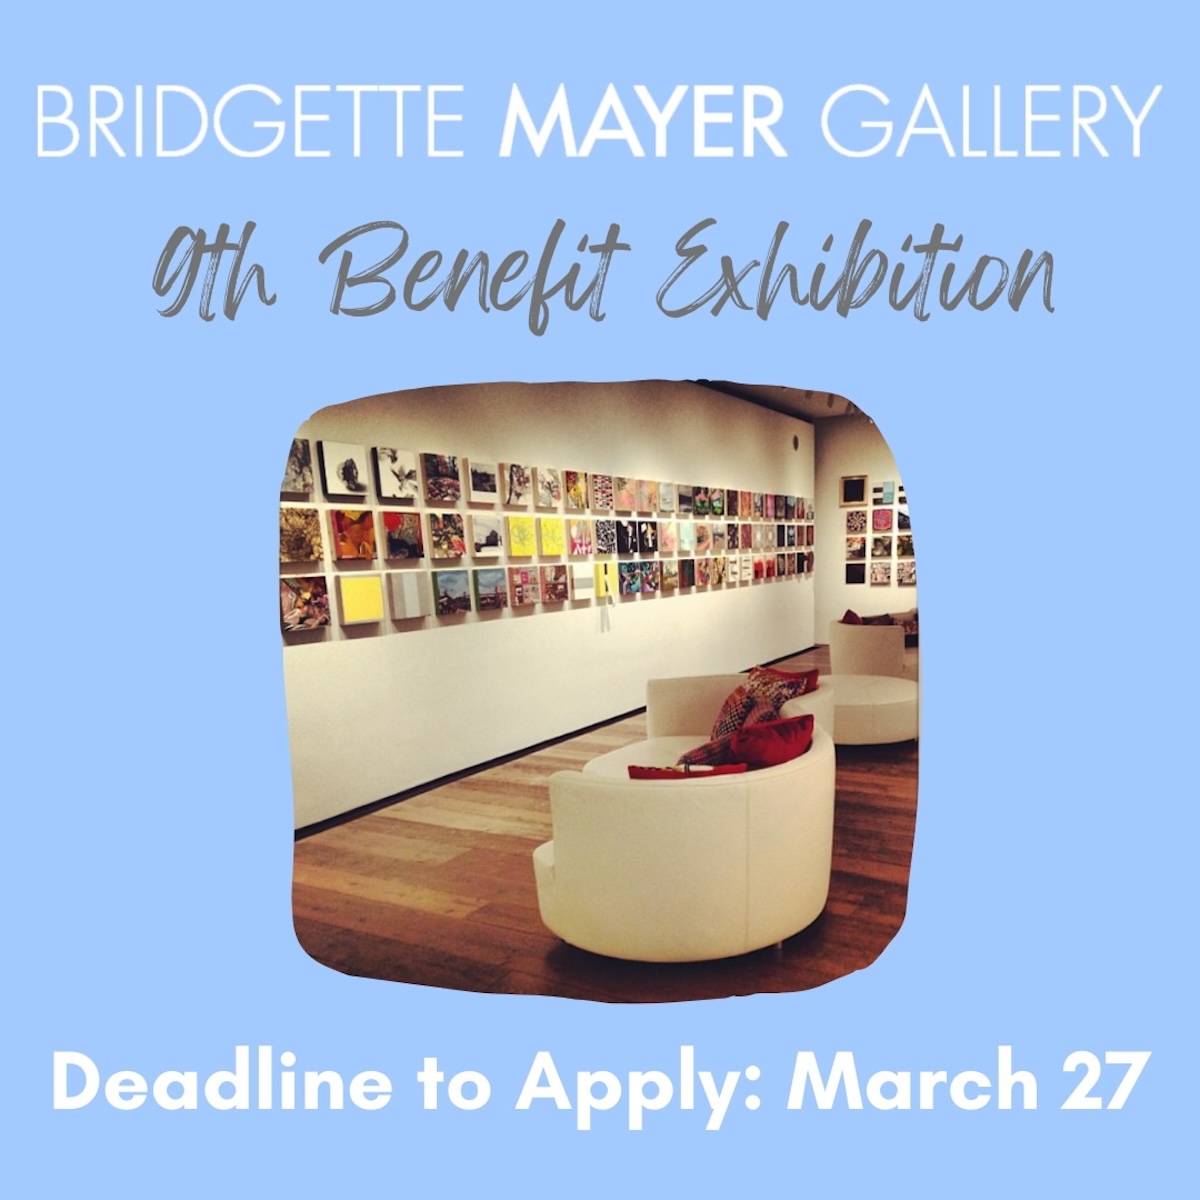 Artist Call to Art for the Bridgette Mayer Gallery